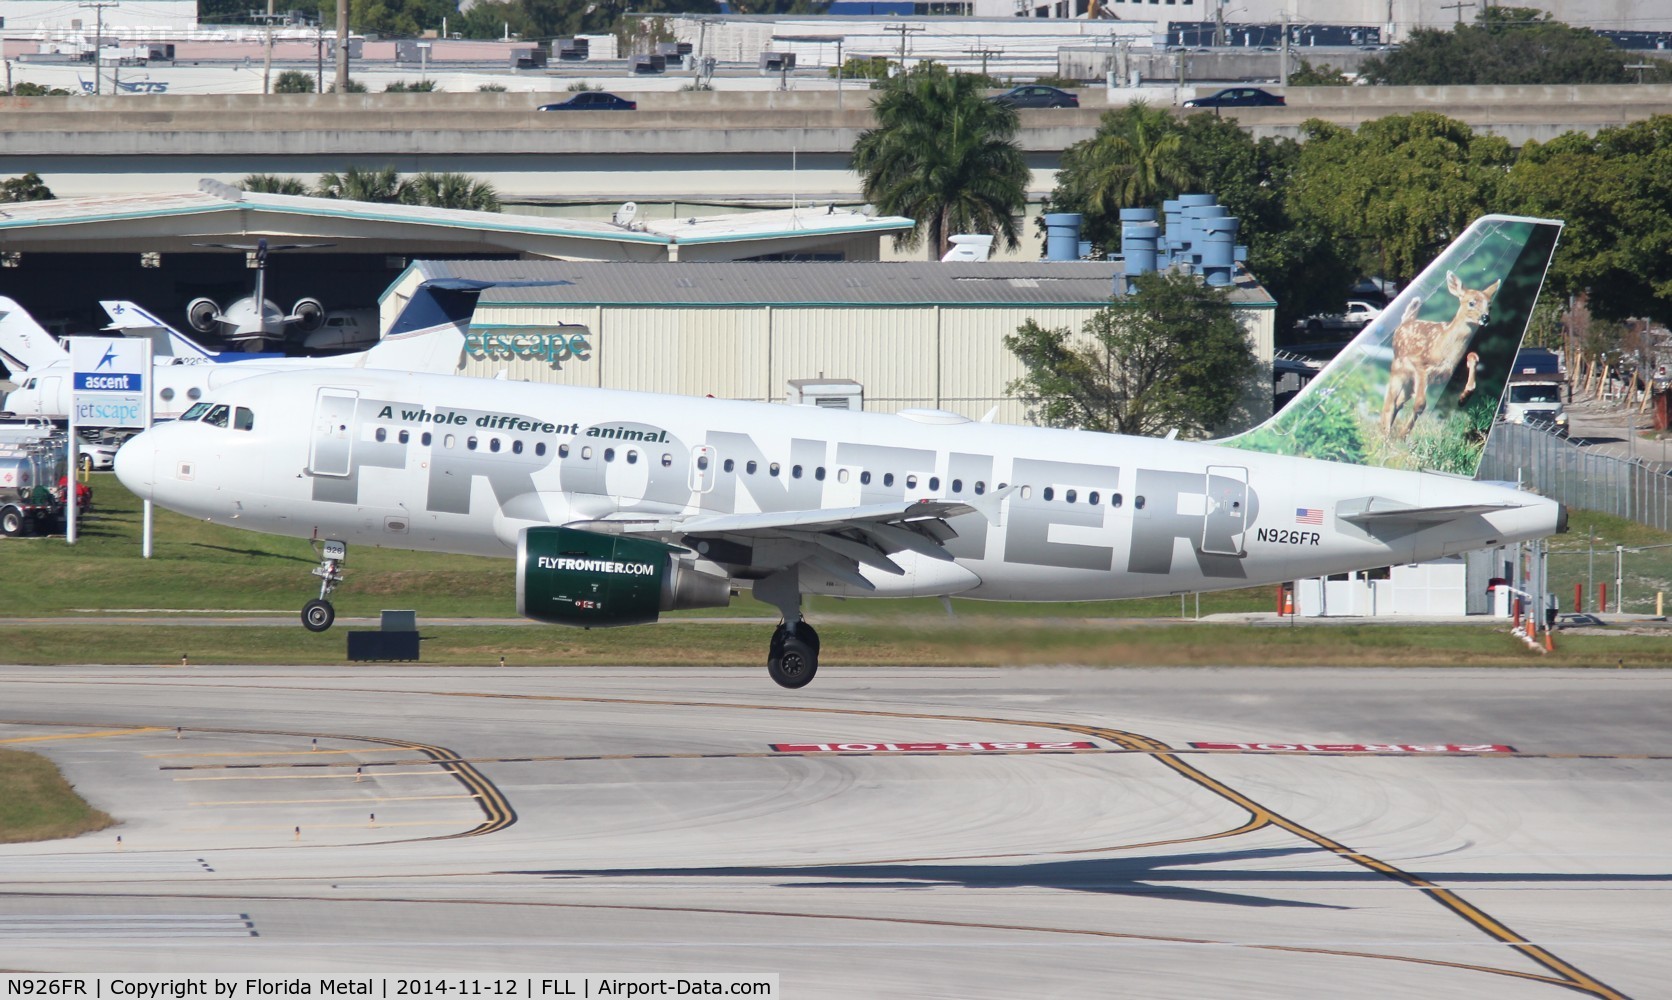 N926FR, 2004 Airbus A319-111 C/N 2198, Frontier Domino the Deer Fawn A319